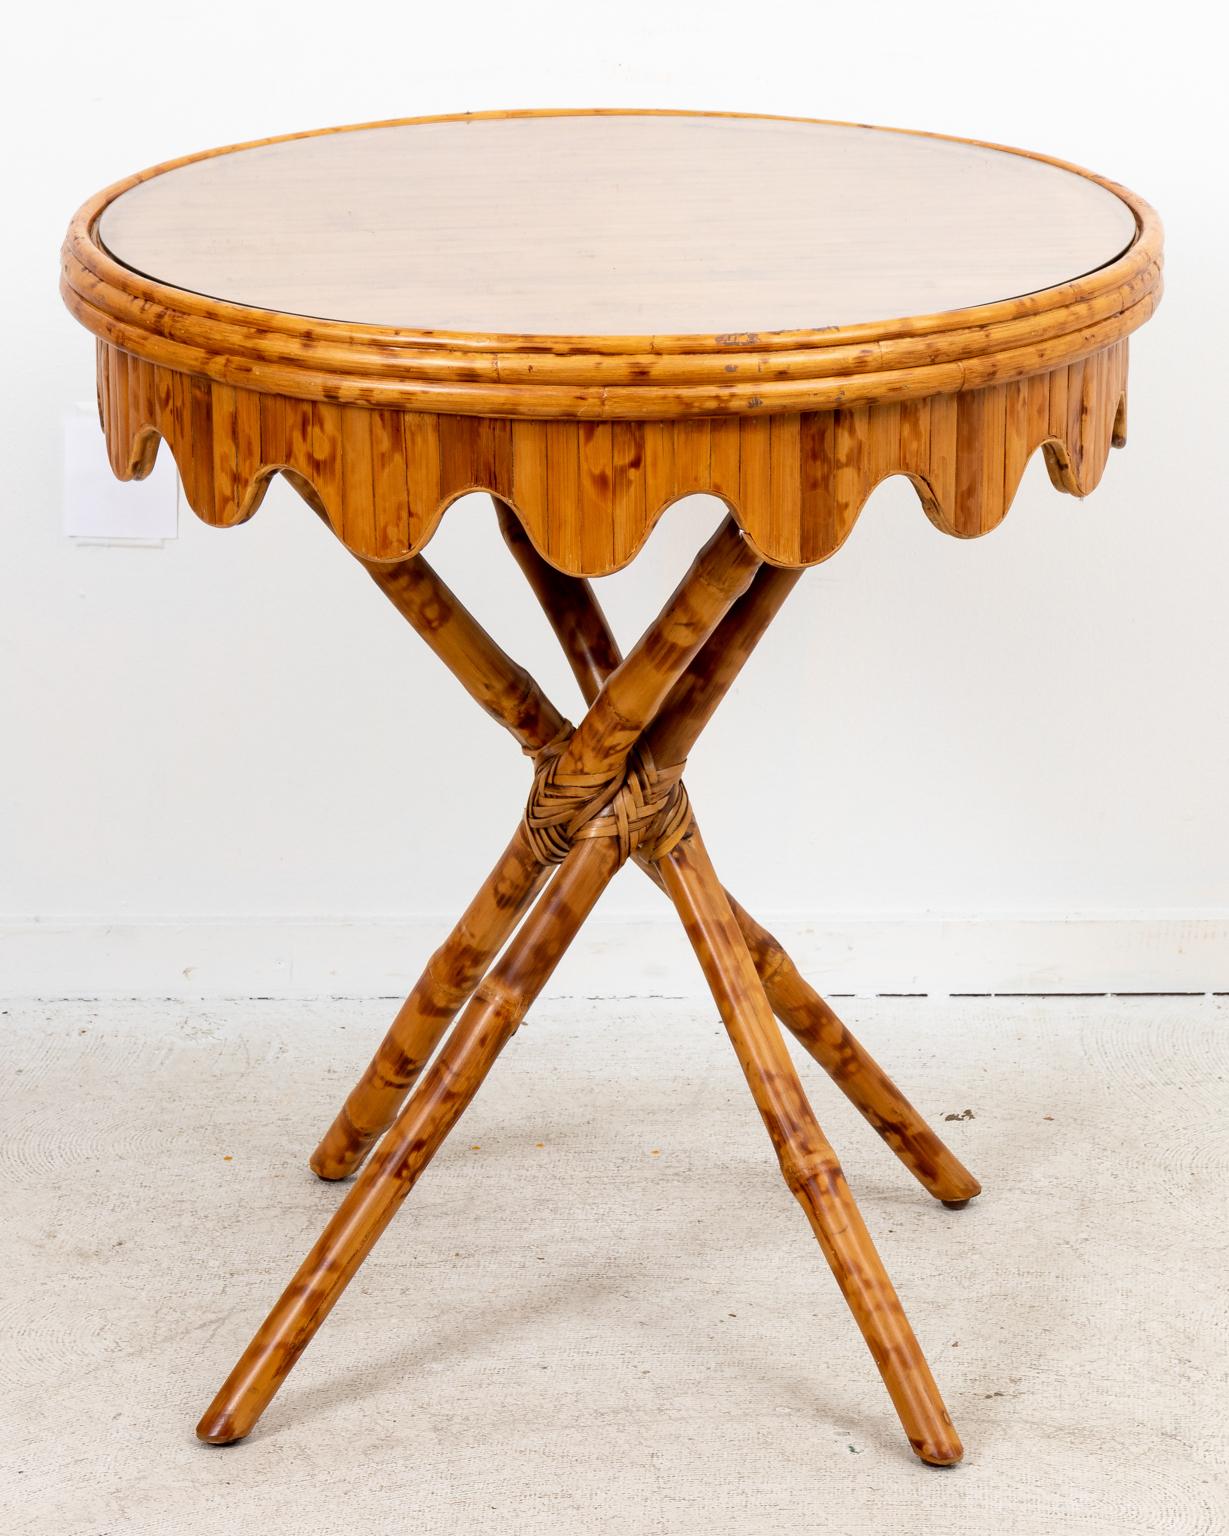 Circa mid-20th century Palm Beach Regency style round bamboo table with scalloped trim skirt and glass top. Made in the United States. Please note of wear consistent with age.